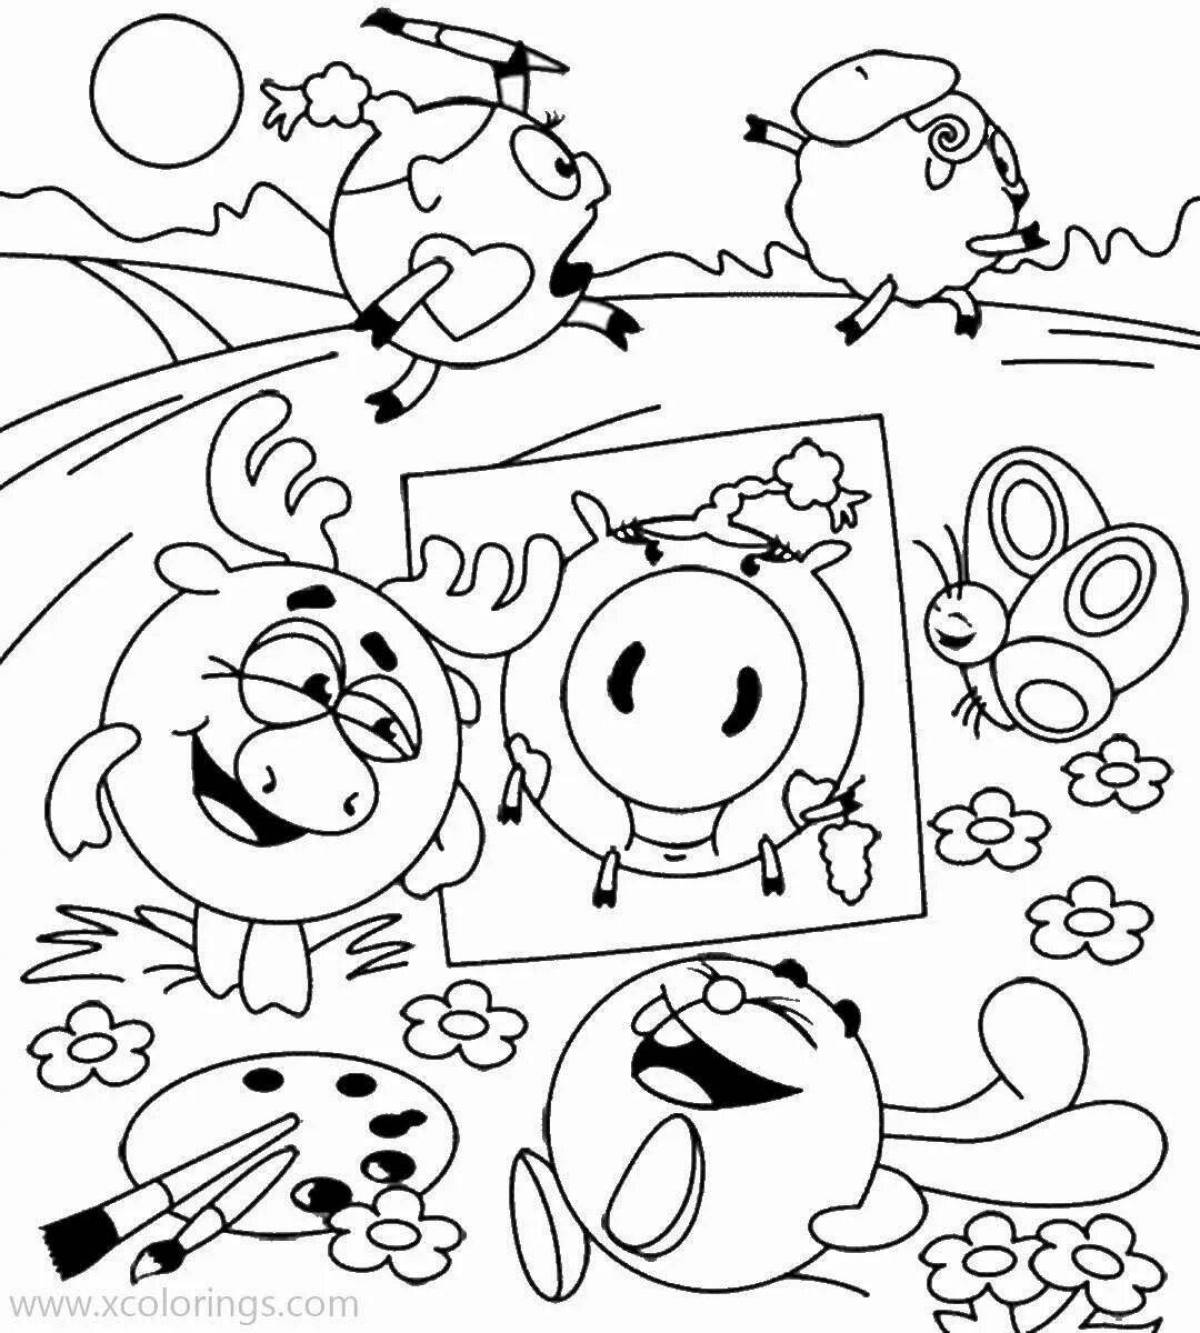 Attractive Smeshariki coloring pages